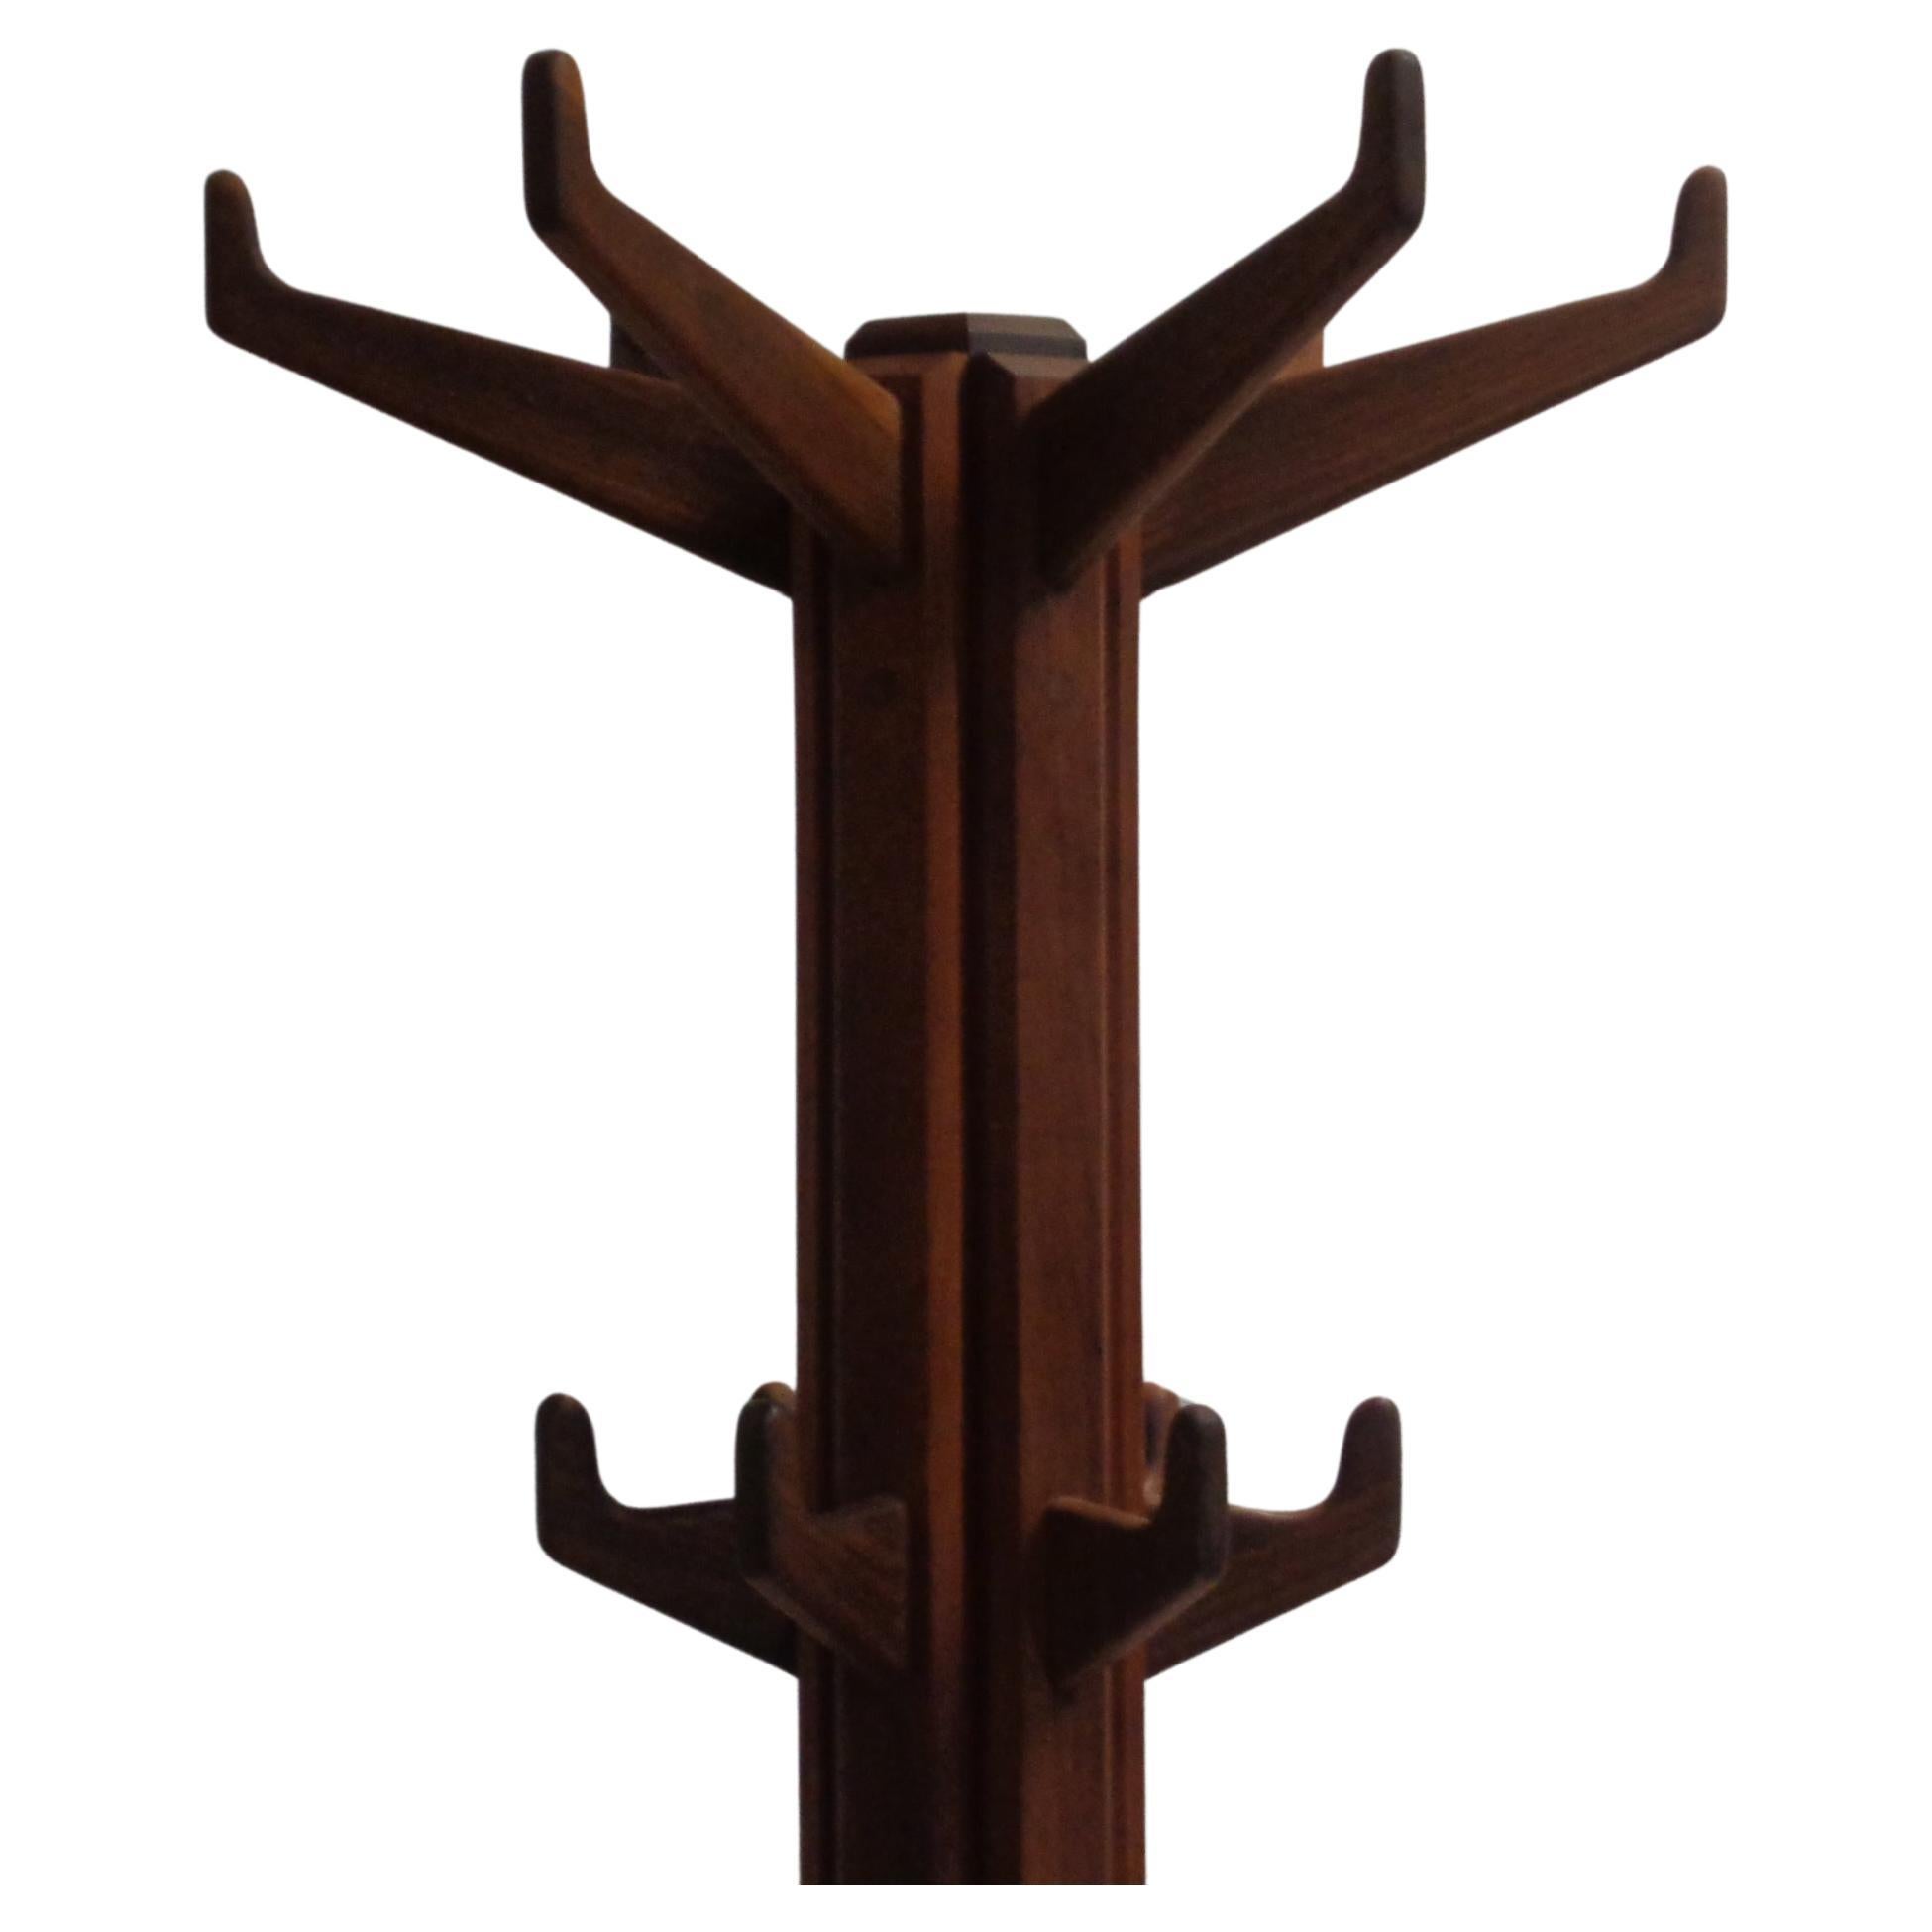 American studio craft movement cherry wood coat tree w/ hand carved and pegged joinery construction. Two levels of beautifully crafted hooks ( six at top and six below ) for coats, hats, scarves. Elongated six legged carved wood base that mirrors